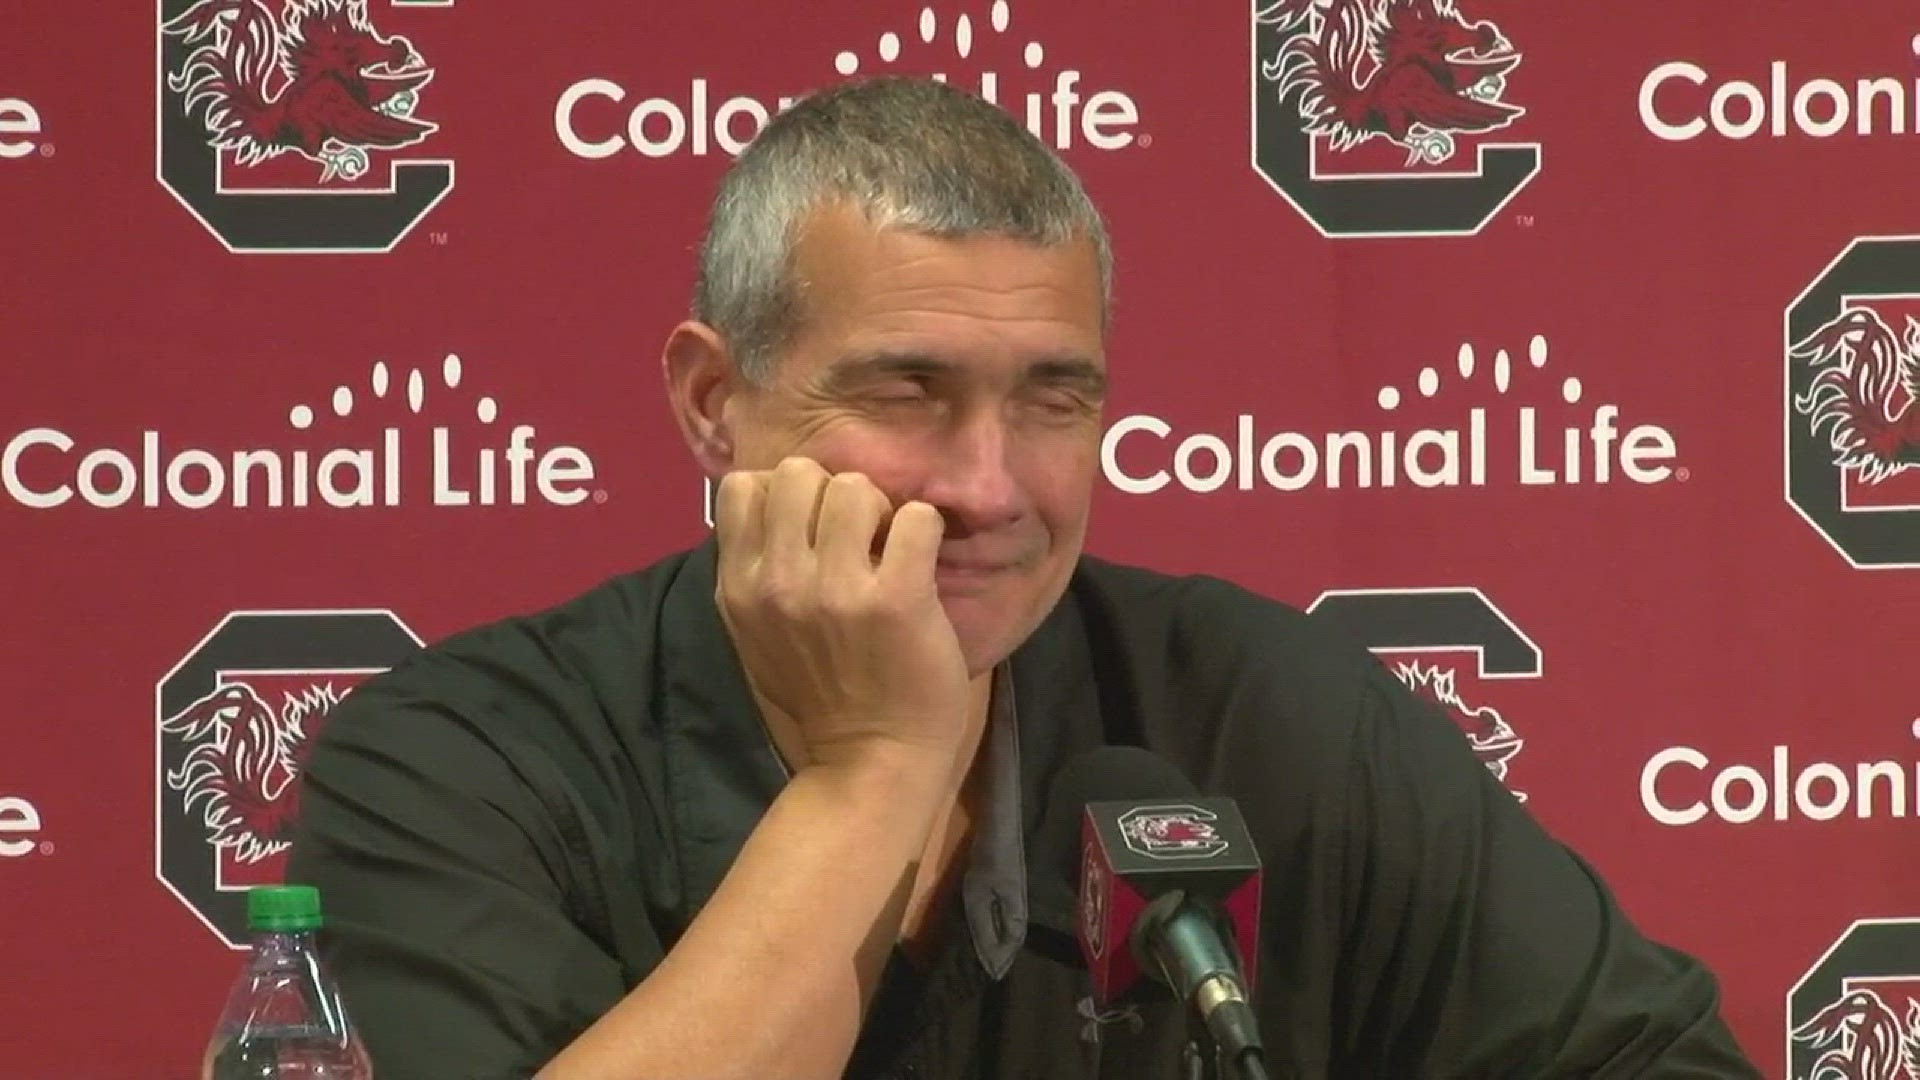 USC men's basketball head coach Frank Martin likes how he see his team prepare, execute and win over No.10 Auburn now they'll need to do it again on the road against a trending Georgia team who just beat No.18 Tennessee in their last game.